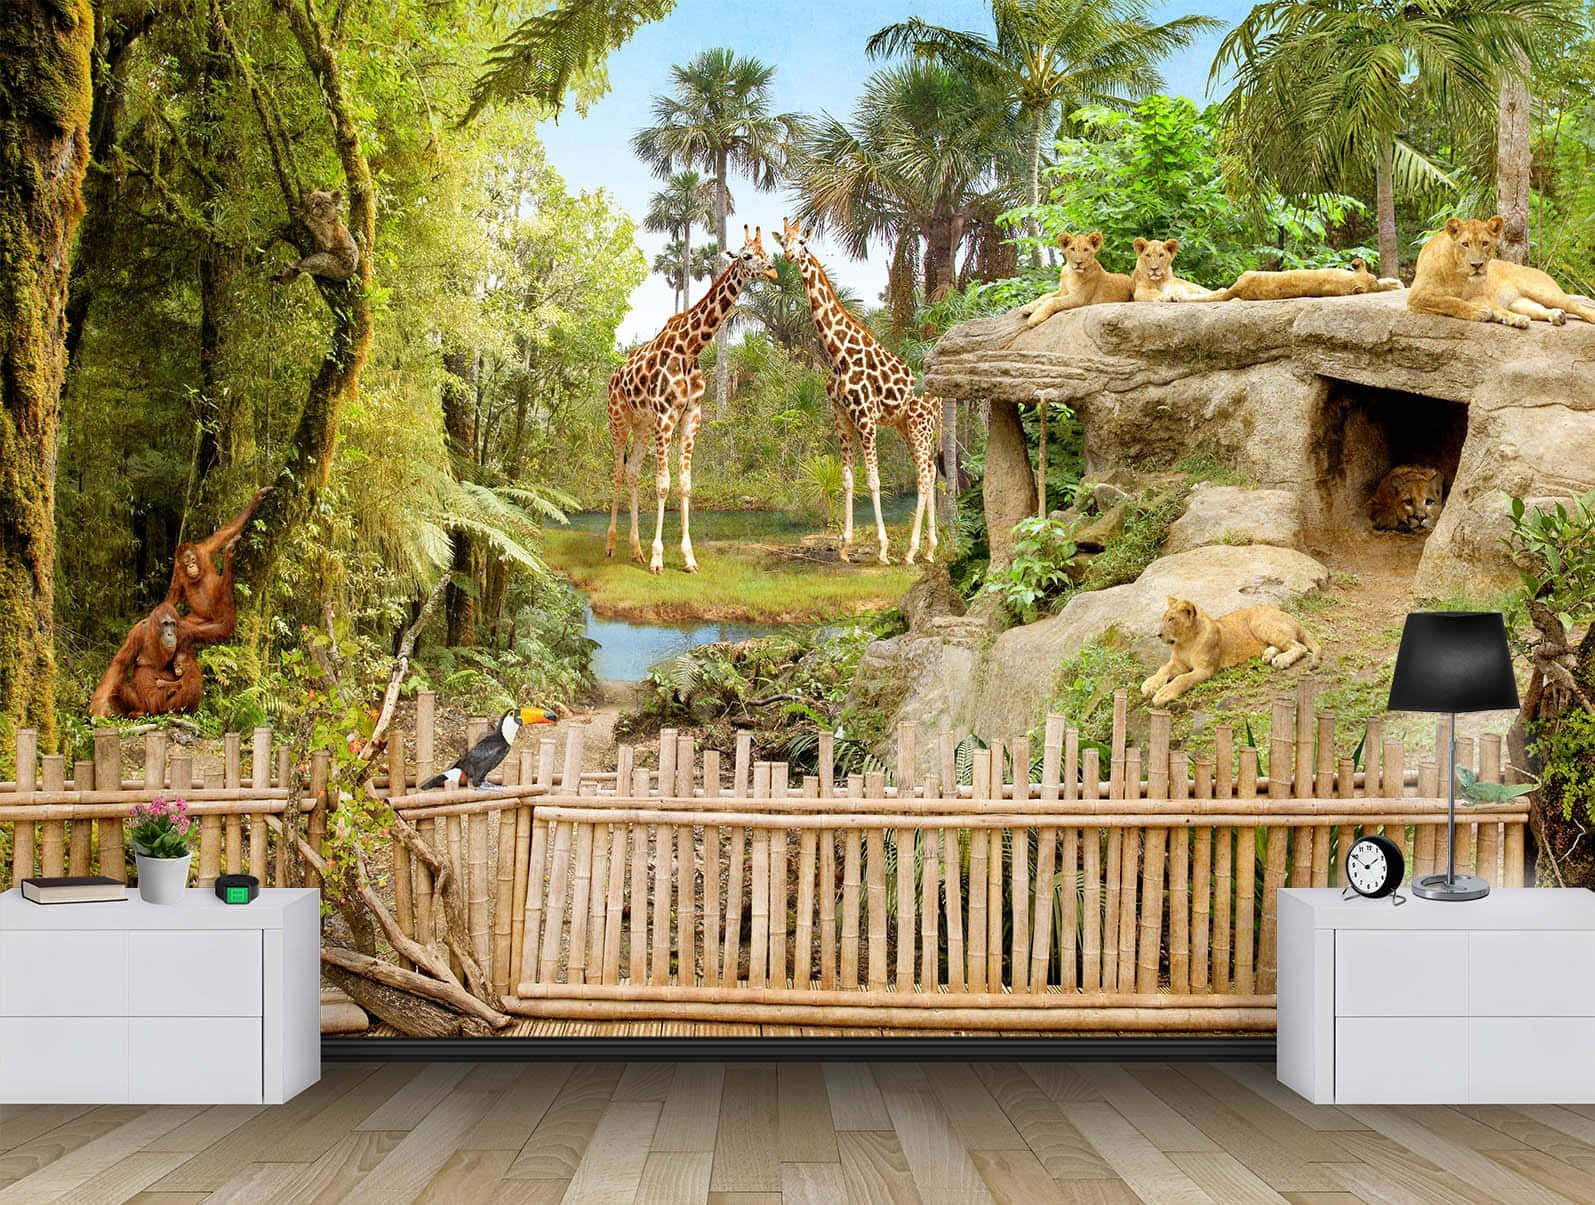 Zoo With Giraffes, Lions And Chimpanzees Wallpaper